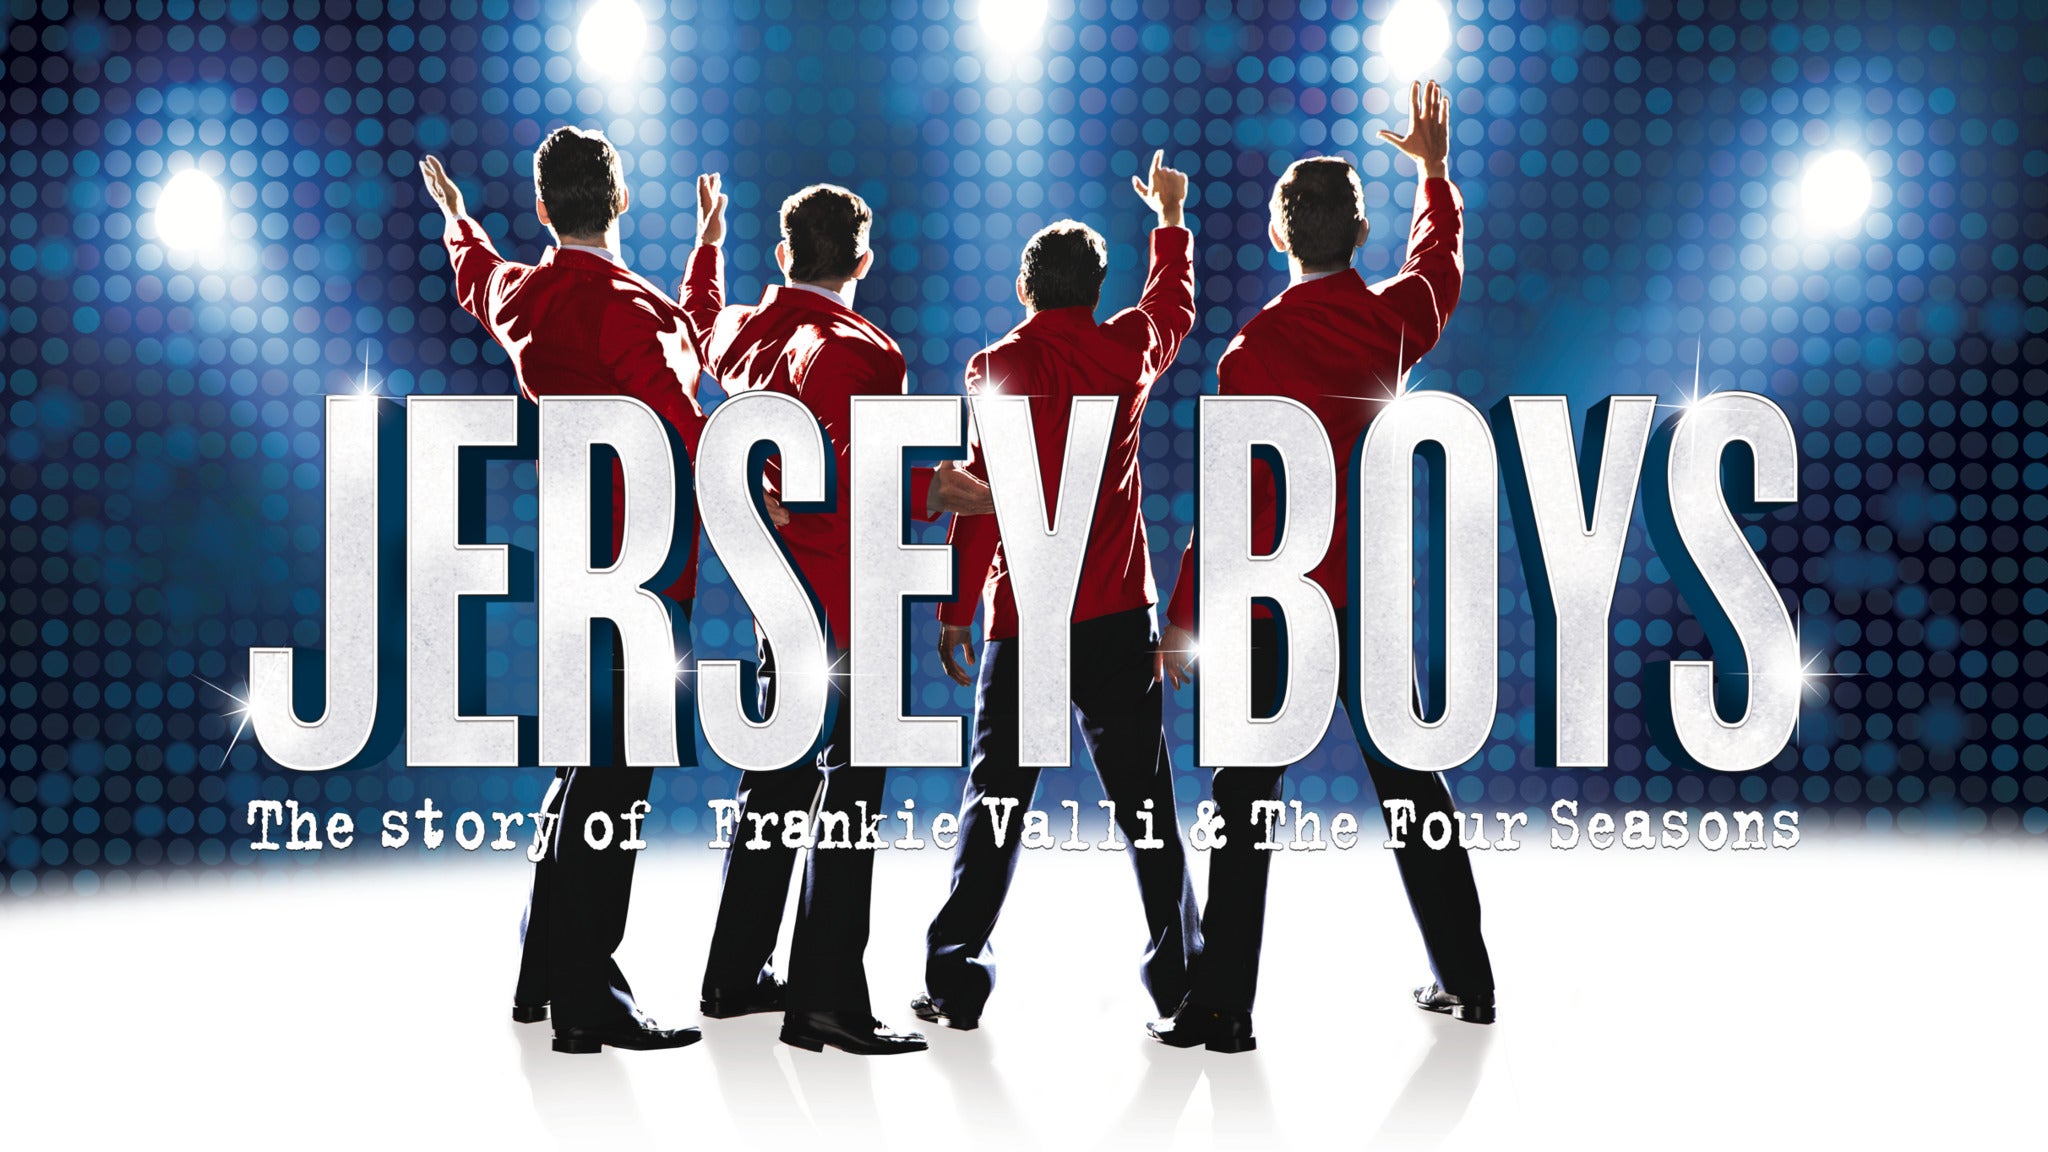 jersey boys ticket prices